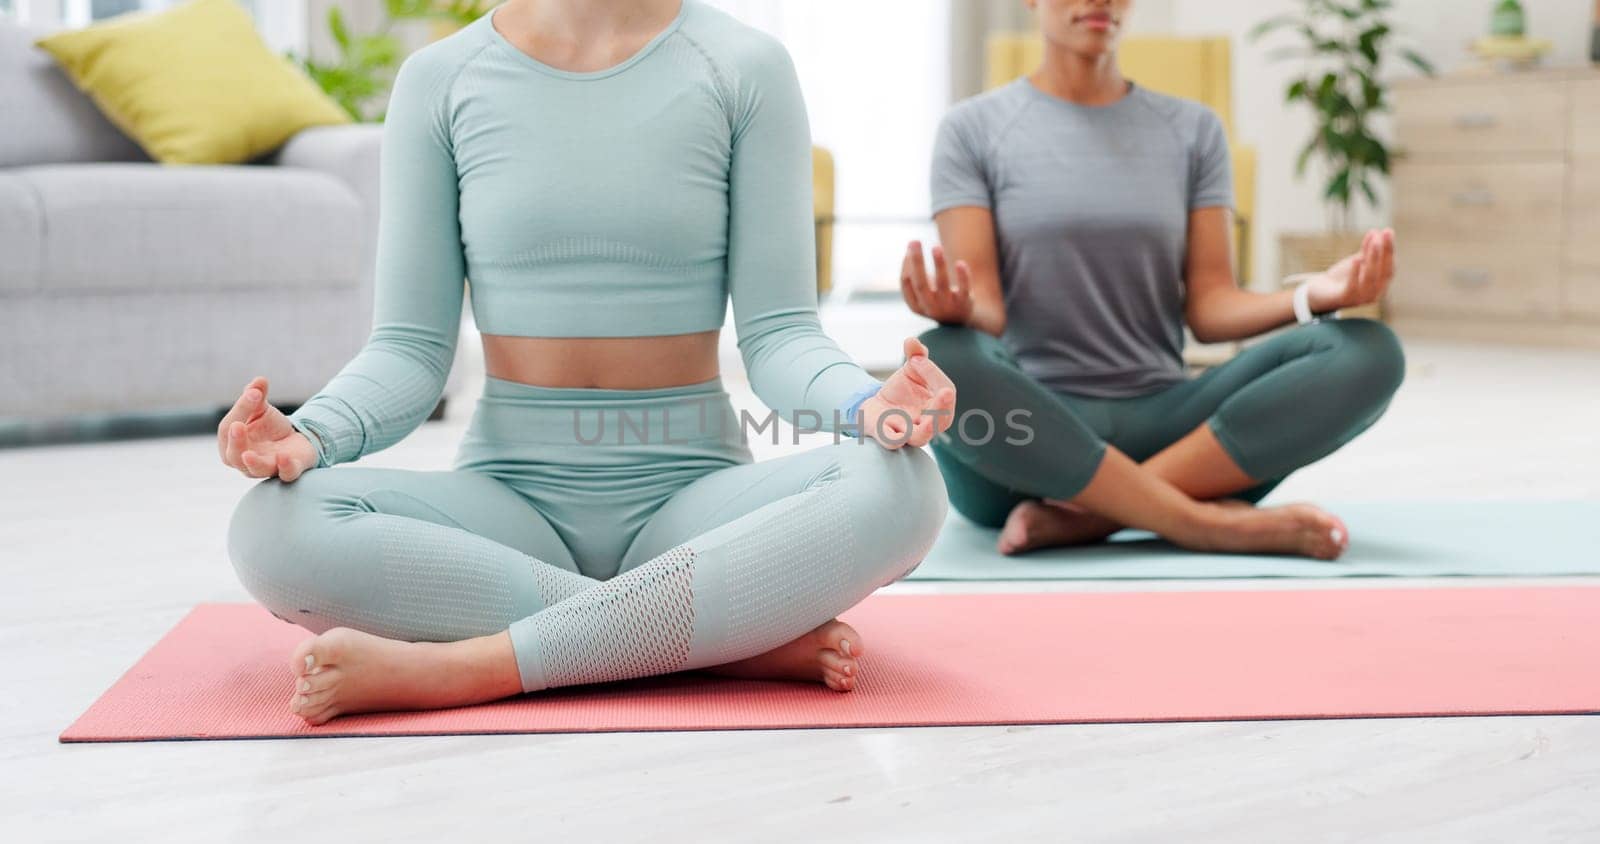 Women, yoga and meditation together with namaste, peace and ready with zen fitness in living room. Friends, personal trainer and exercise with health, workout or wellness in lounge with mindfulness.